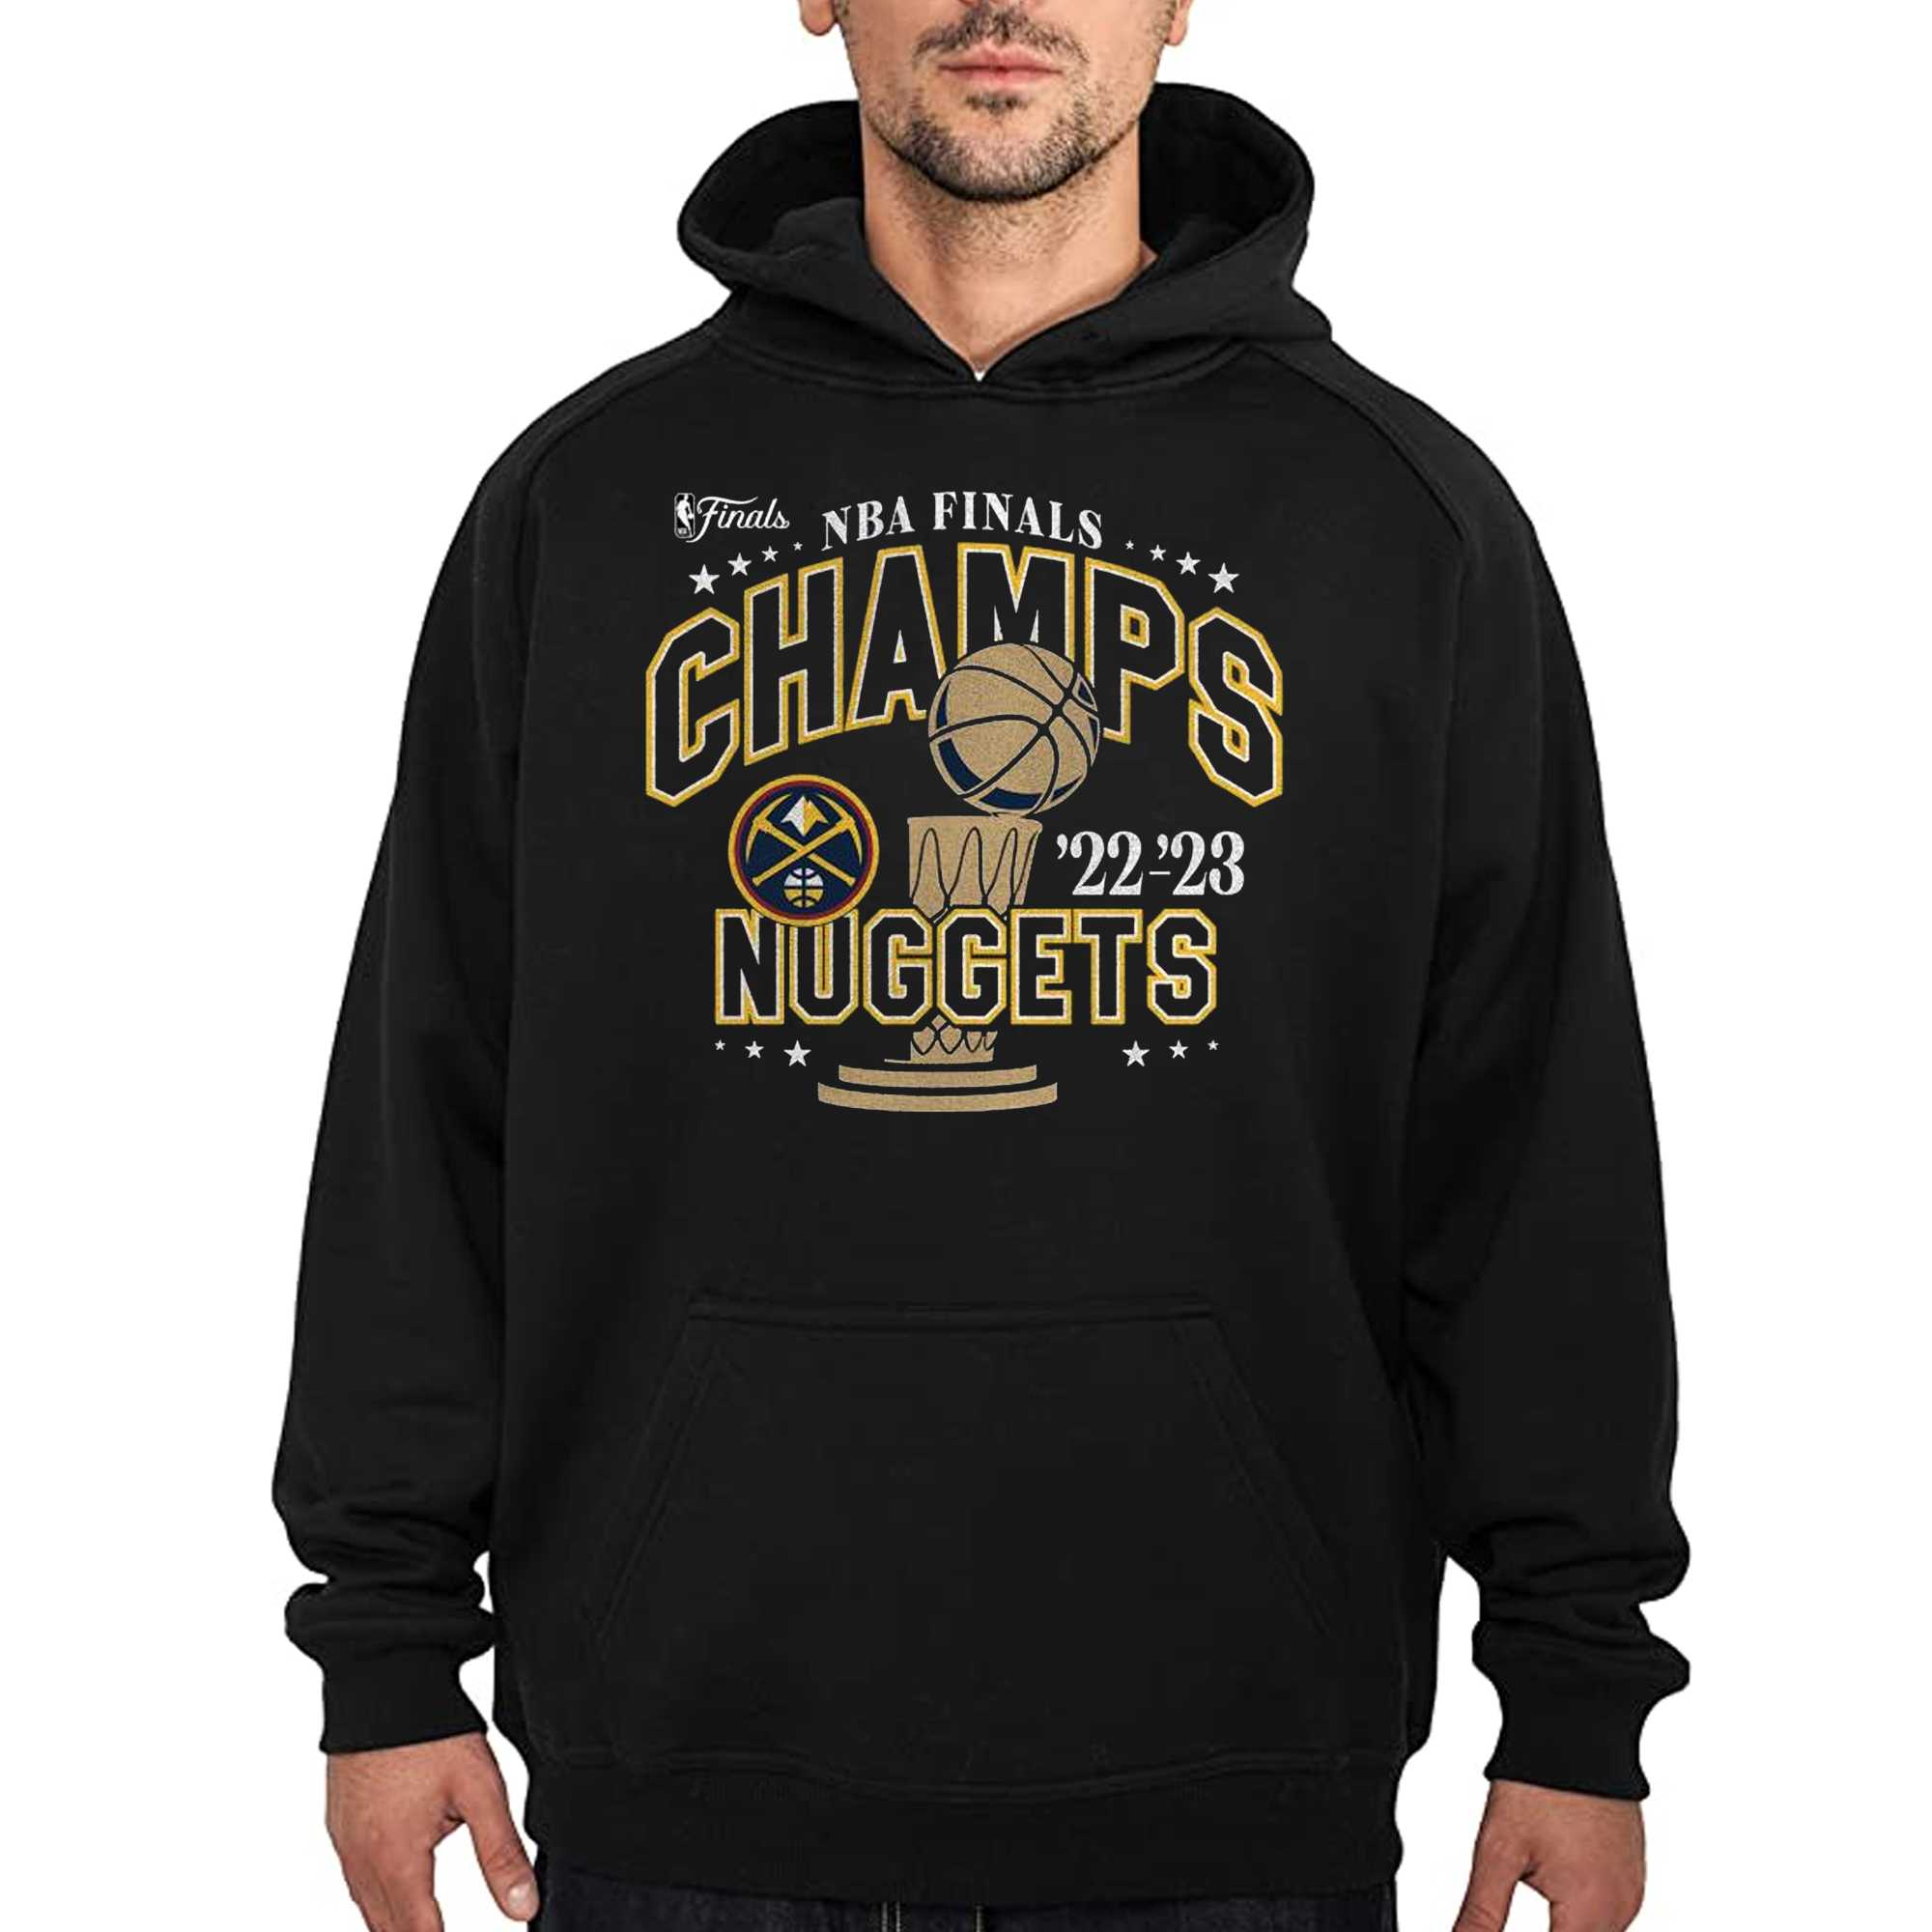 Denver Nuggets 2023 NBA champions shirts, hats: Where to get more